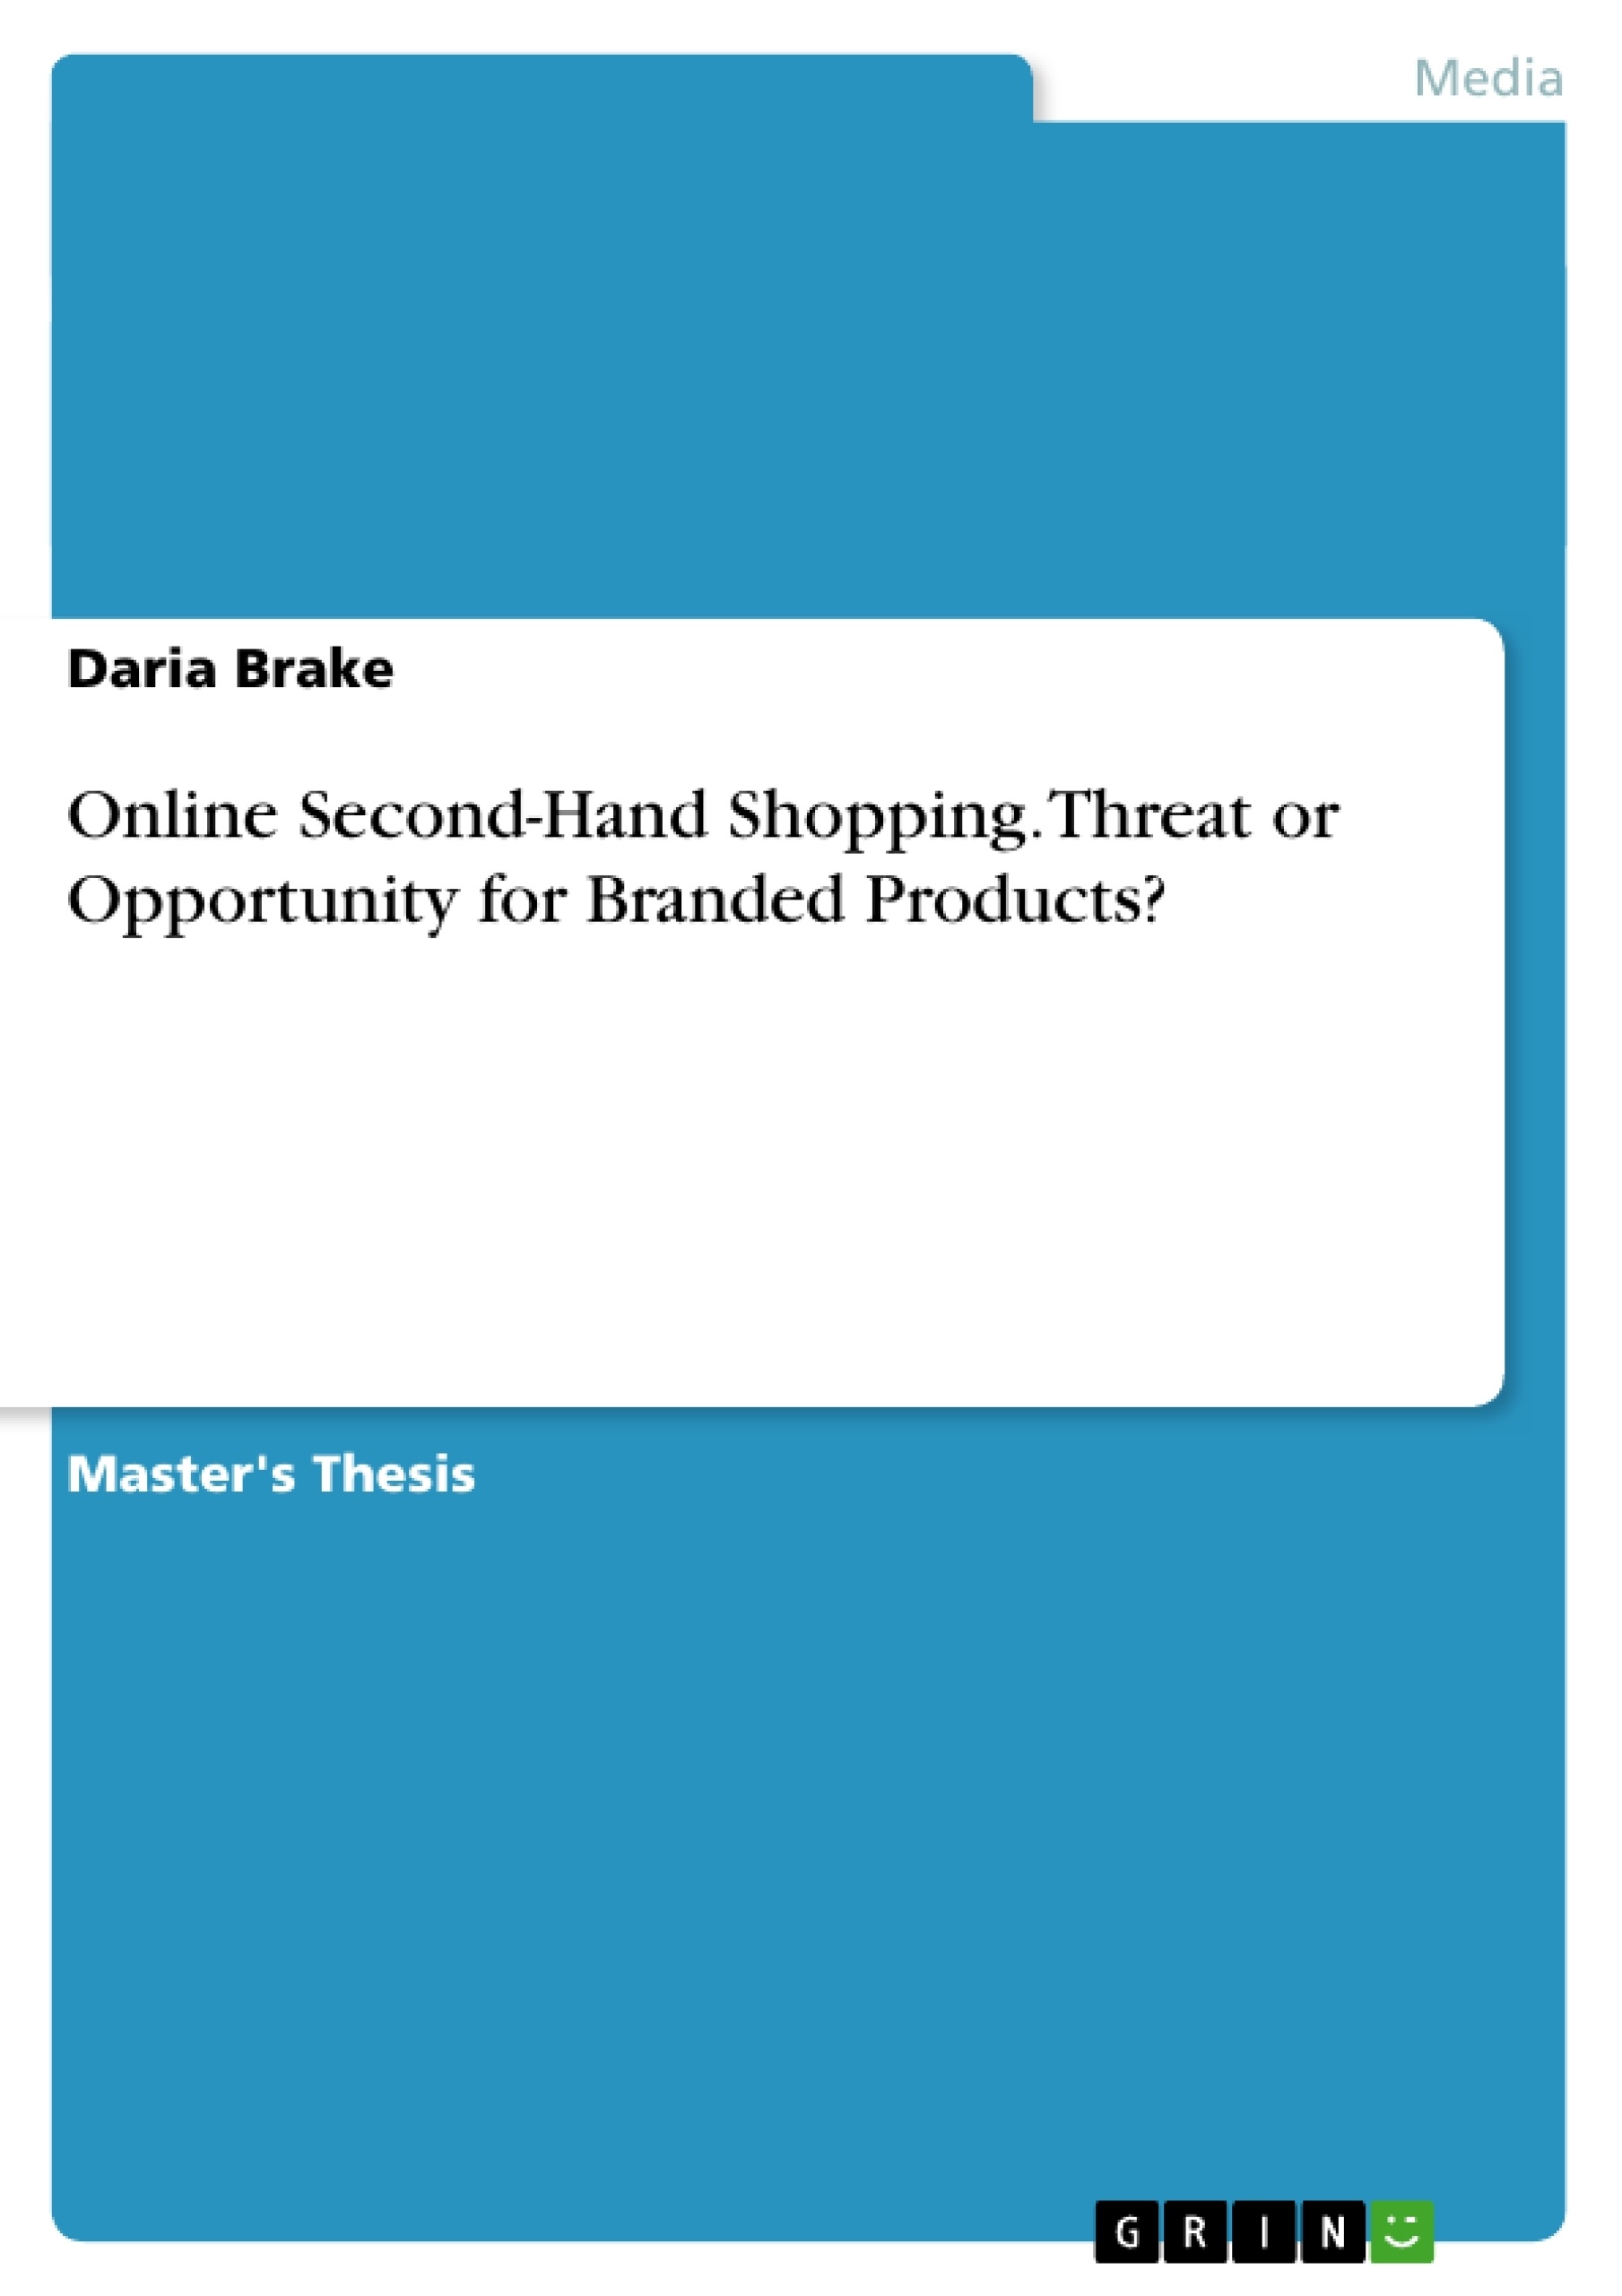 Title: Online Second-Hand Shopping. Threat or Opportunity for Branded Products?